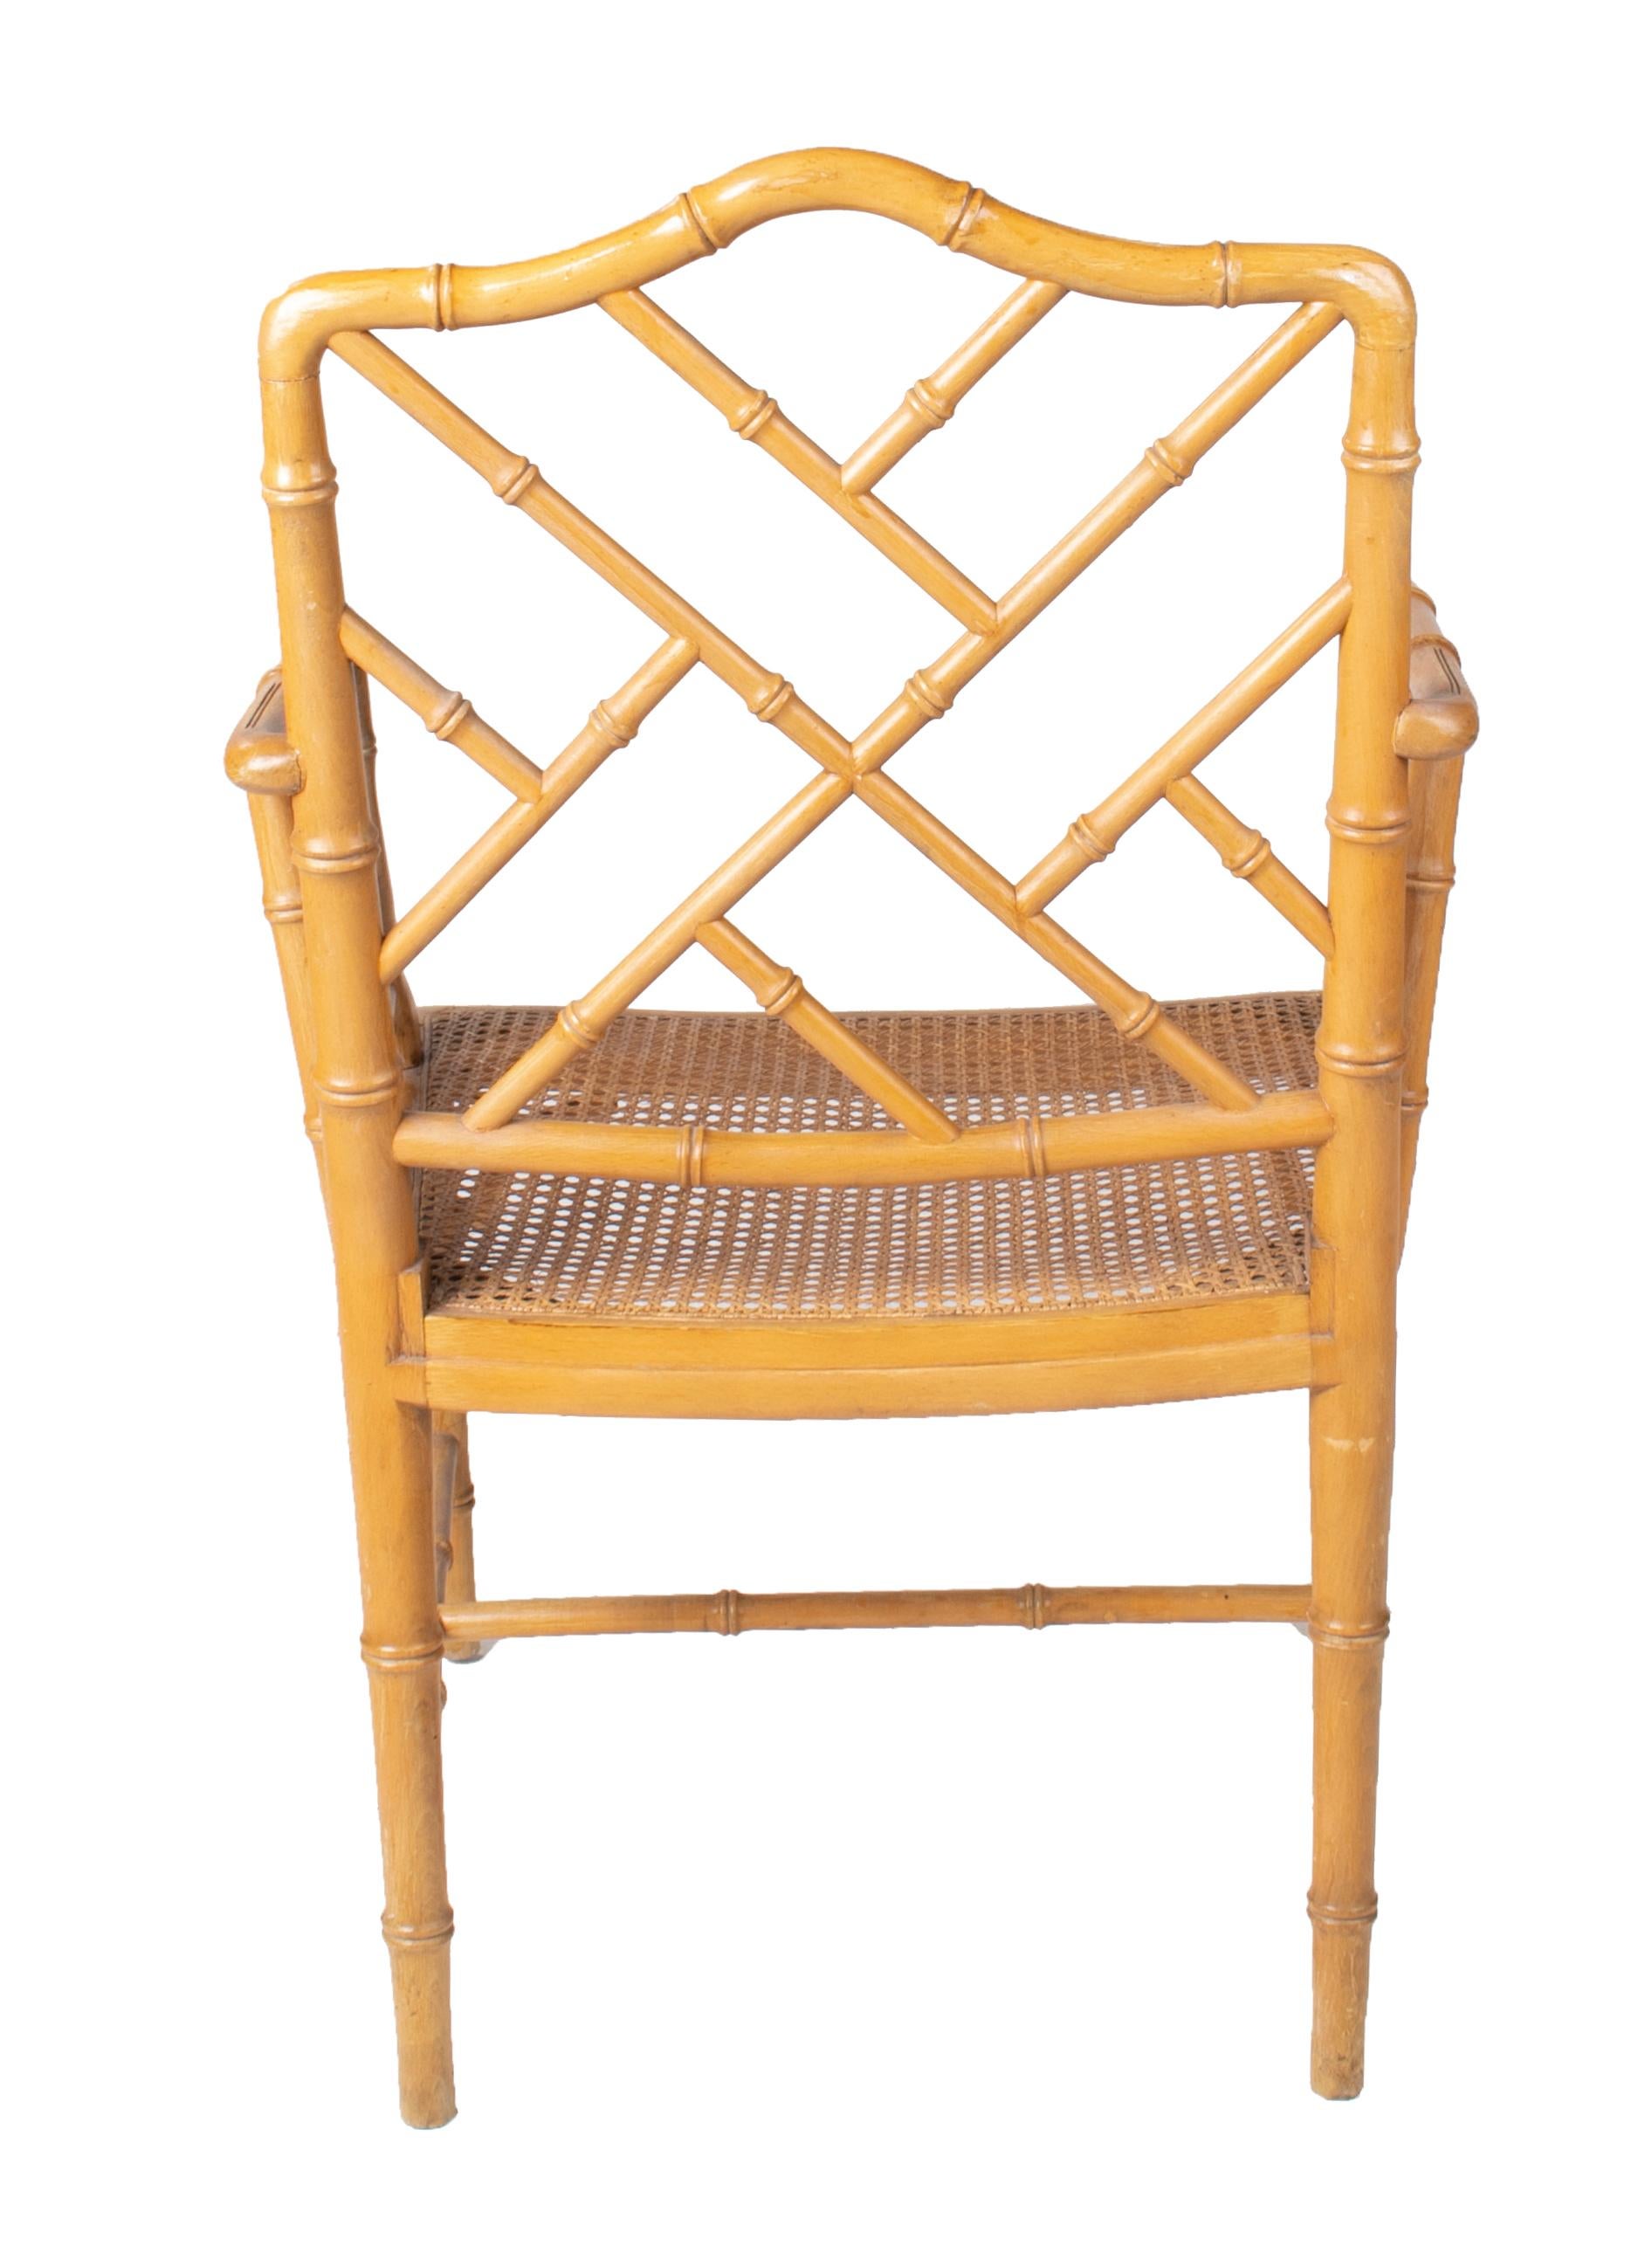 1970s Spanish Wooden Armchair Imitating Bamboo with Woven Wicker Seat 1